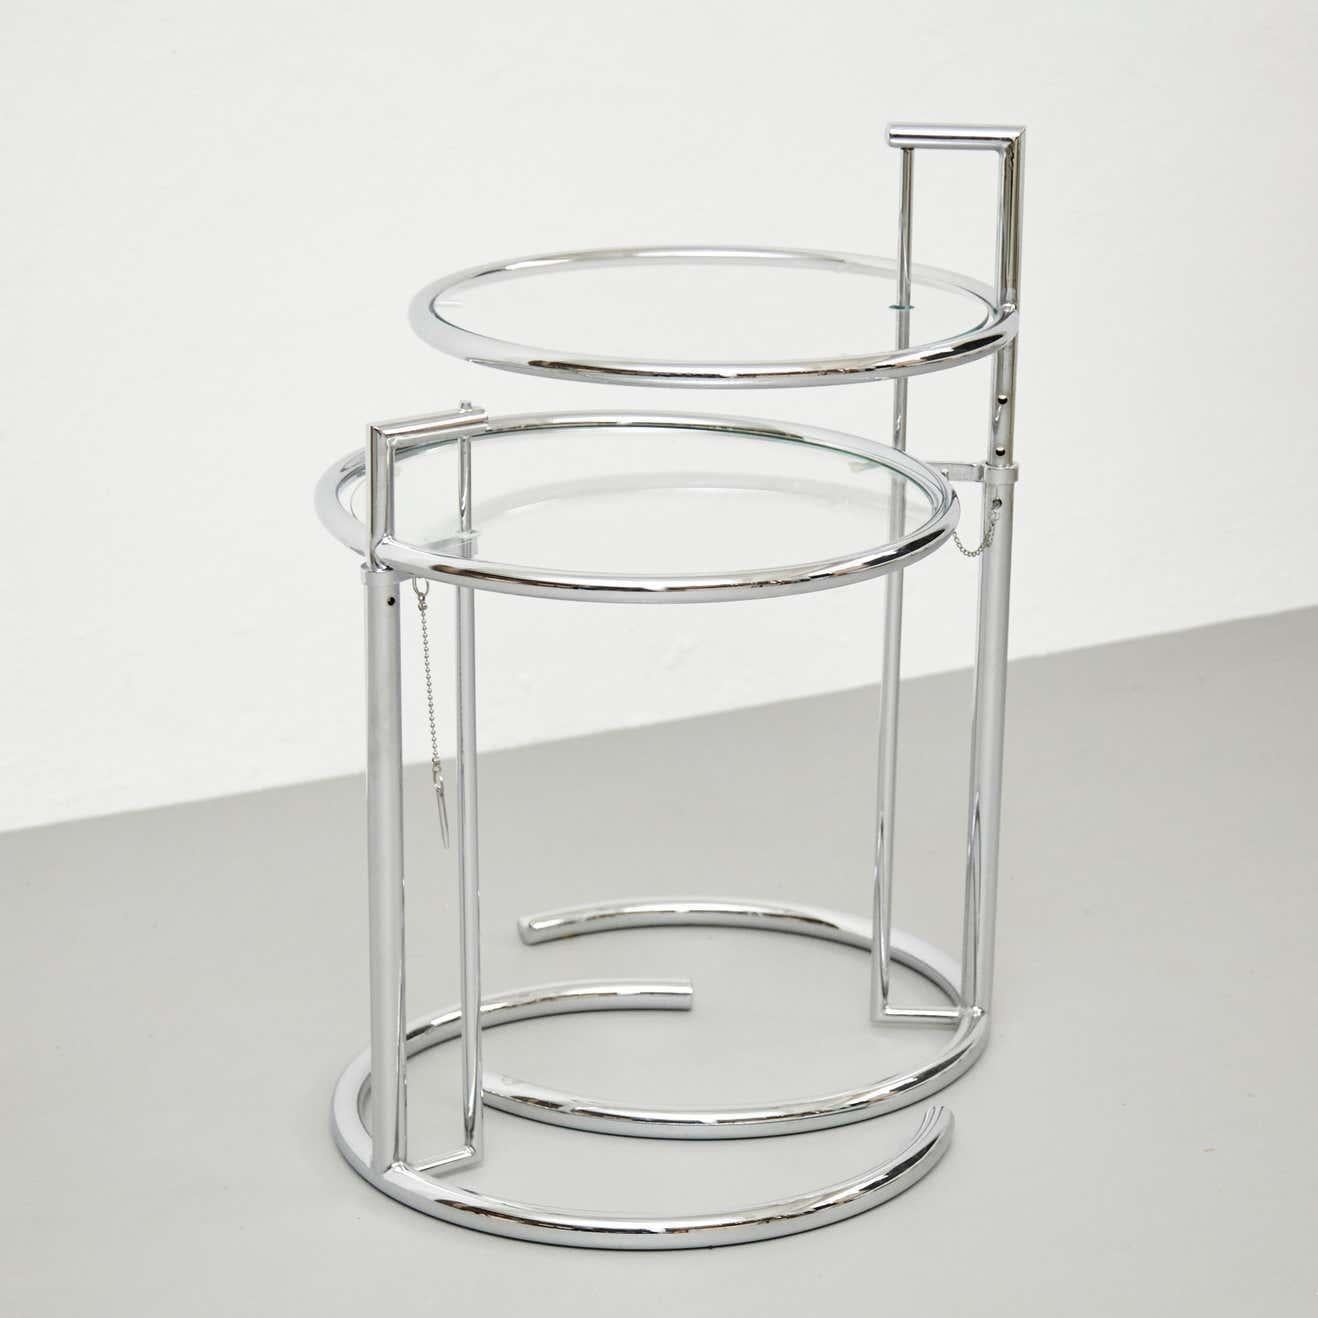 German After Eileen Gray Pair of E1027 Side Tables, Glass and Tubular Steel, circa 1970